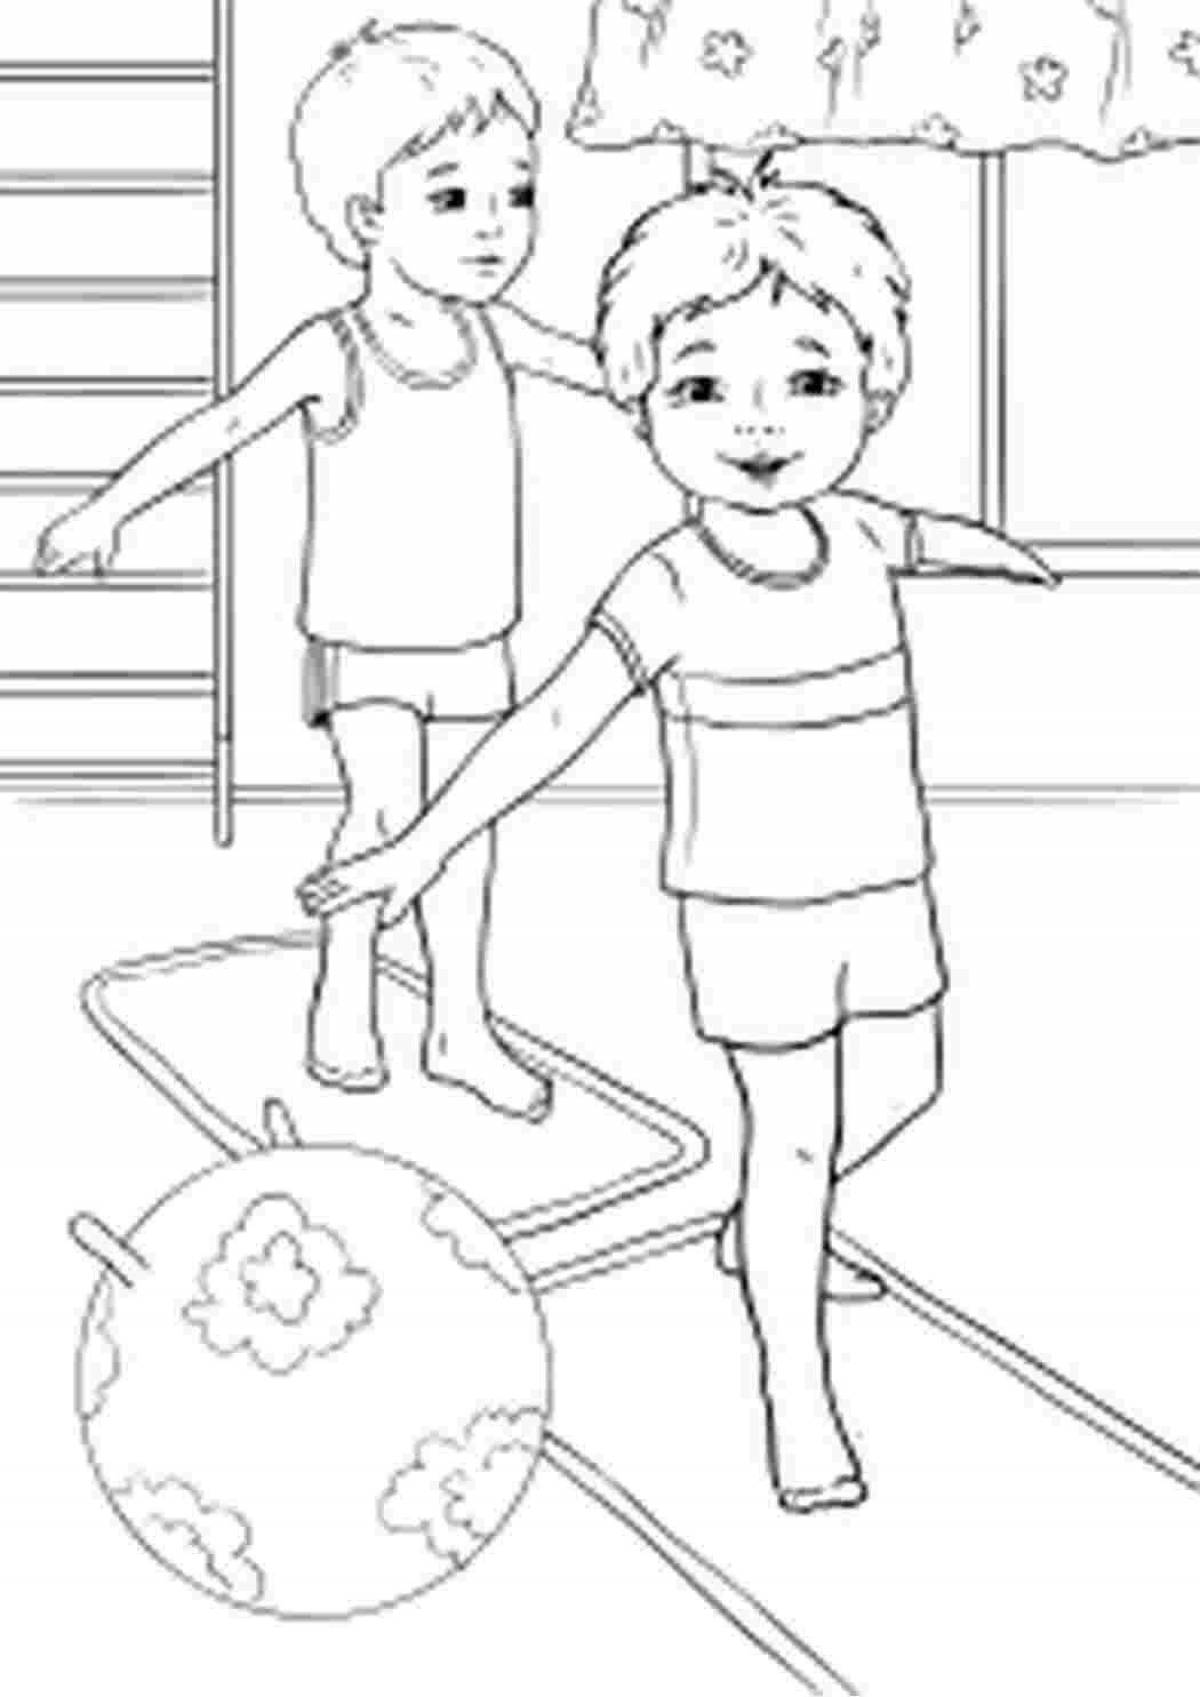 Charming healthy habits coloring page